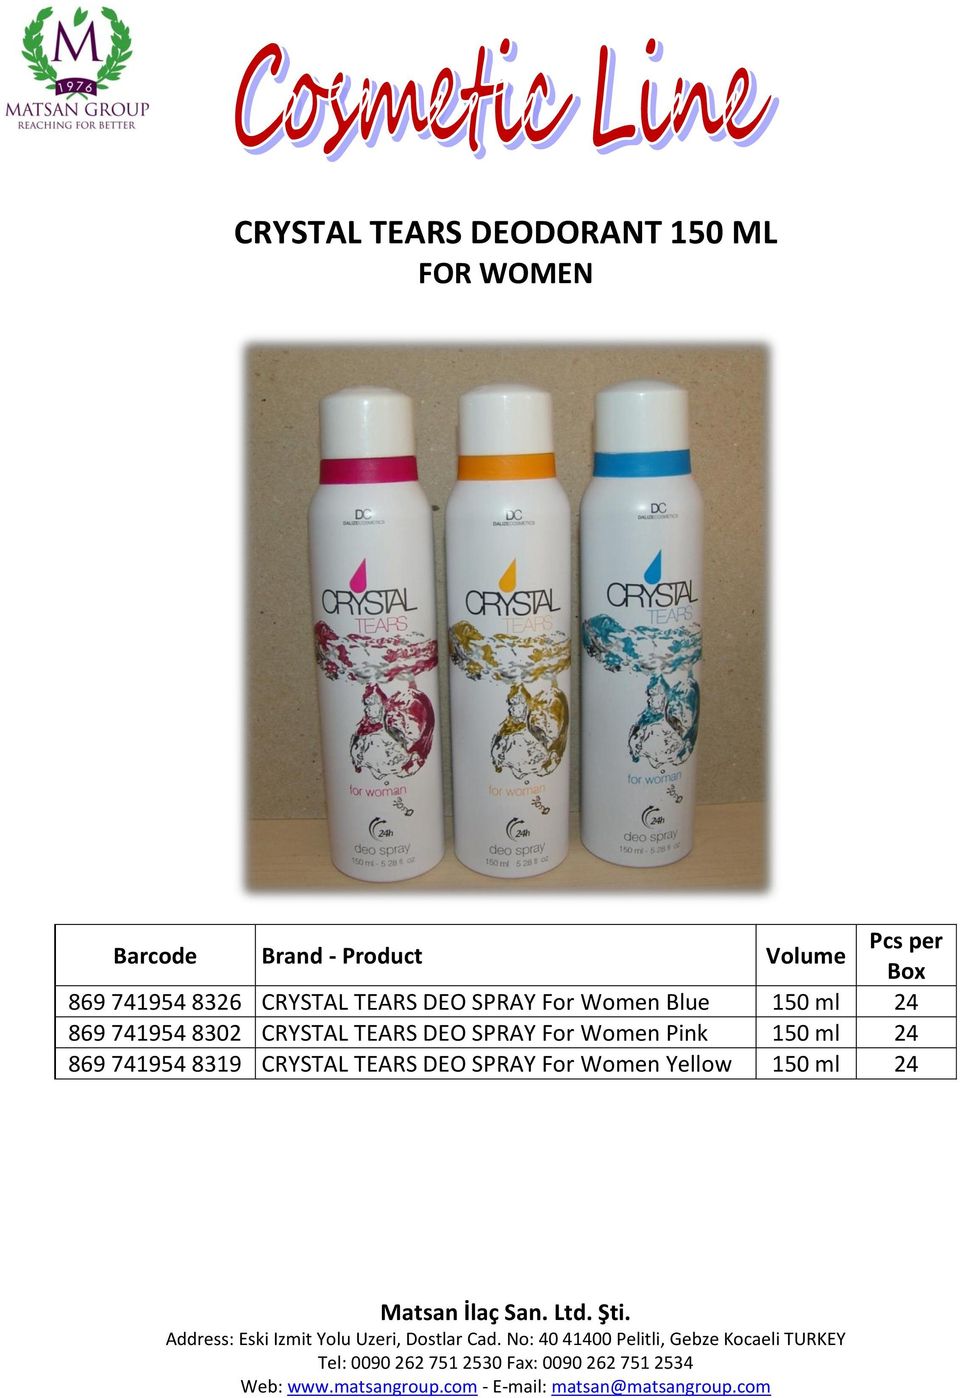 8302 CRYSTAL TEARS DEO SPRAY For Women Pink 150 ml 24 869